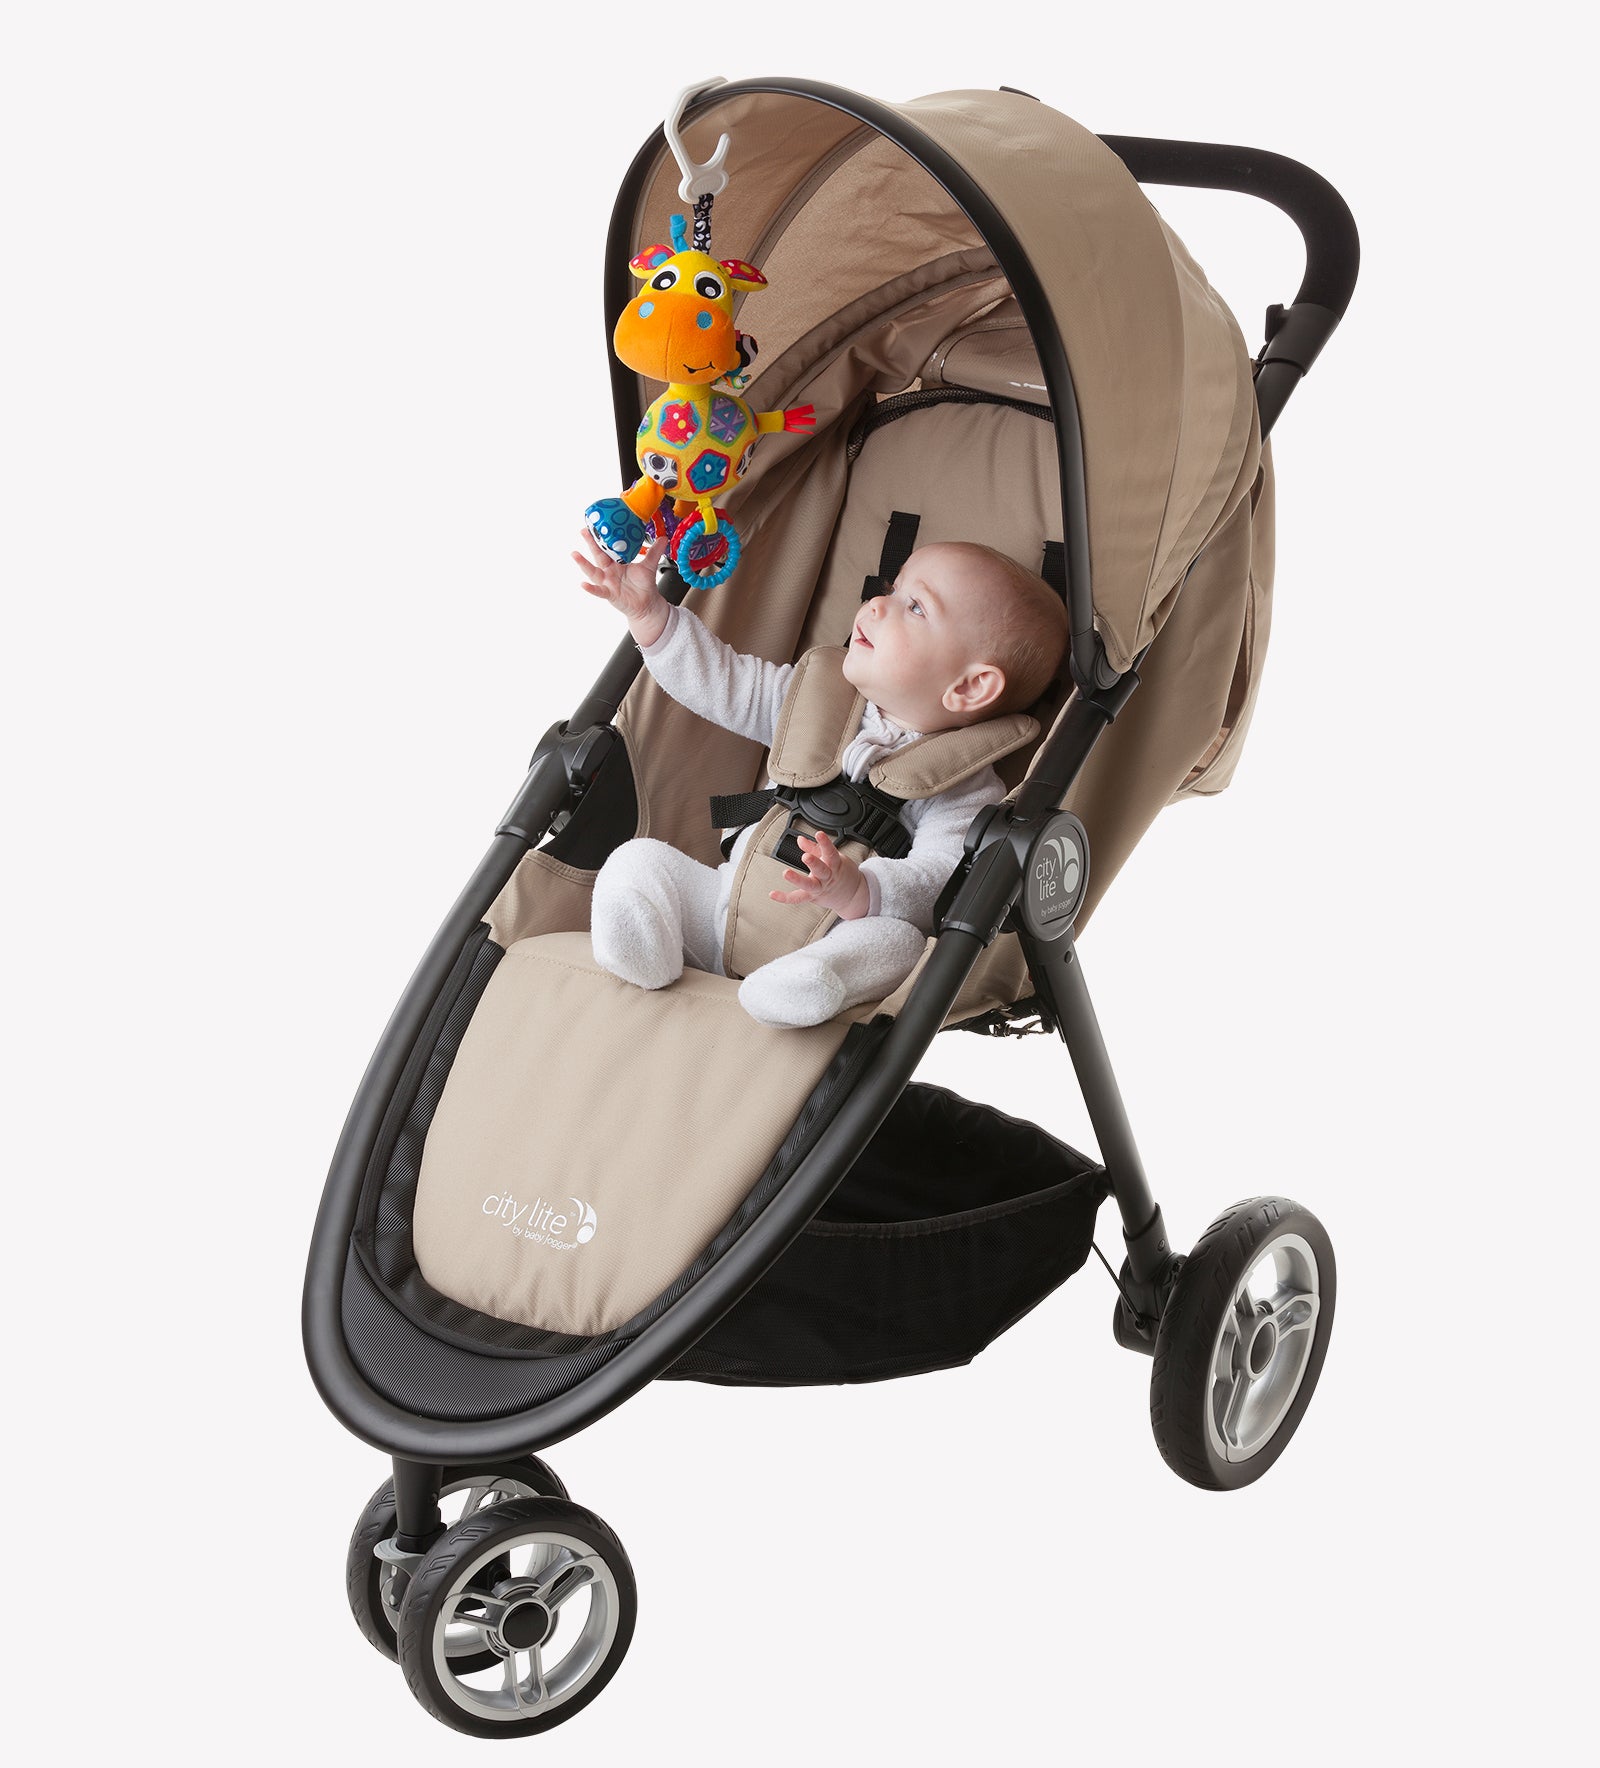 A baby in a stroller trying to reach Playgro Giraffe Stroller toys hanging in  the stroller canopy